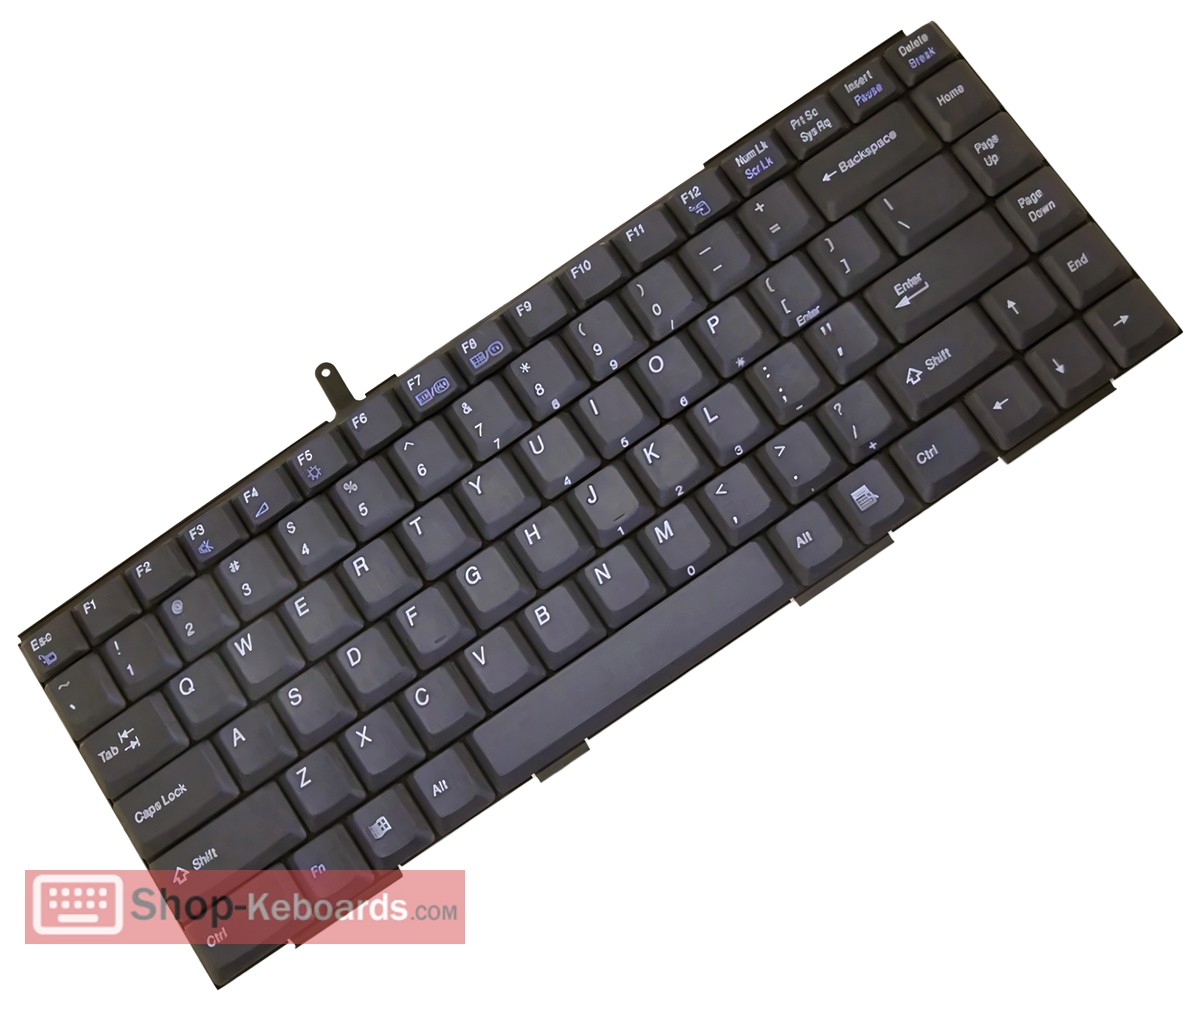 Sony VAIO PCG-F490 Keyboard replacement